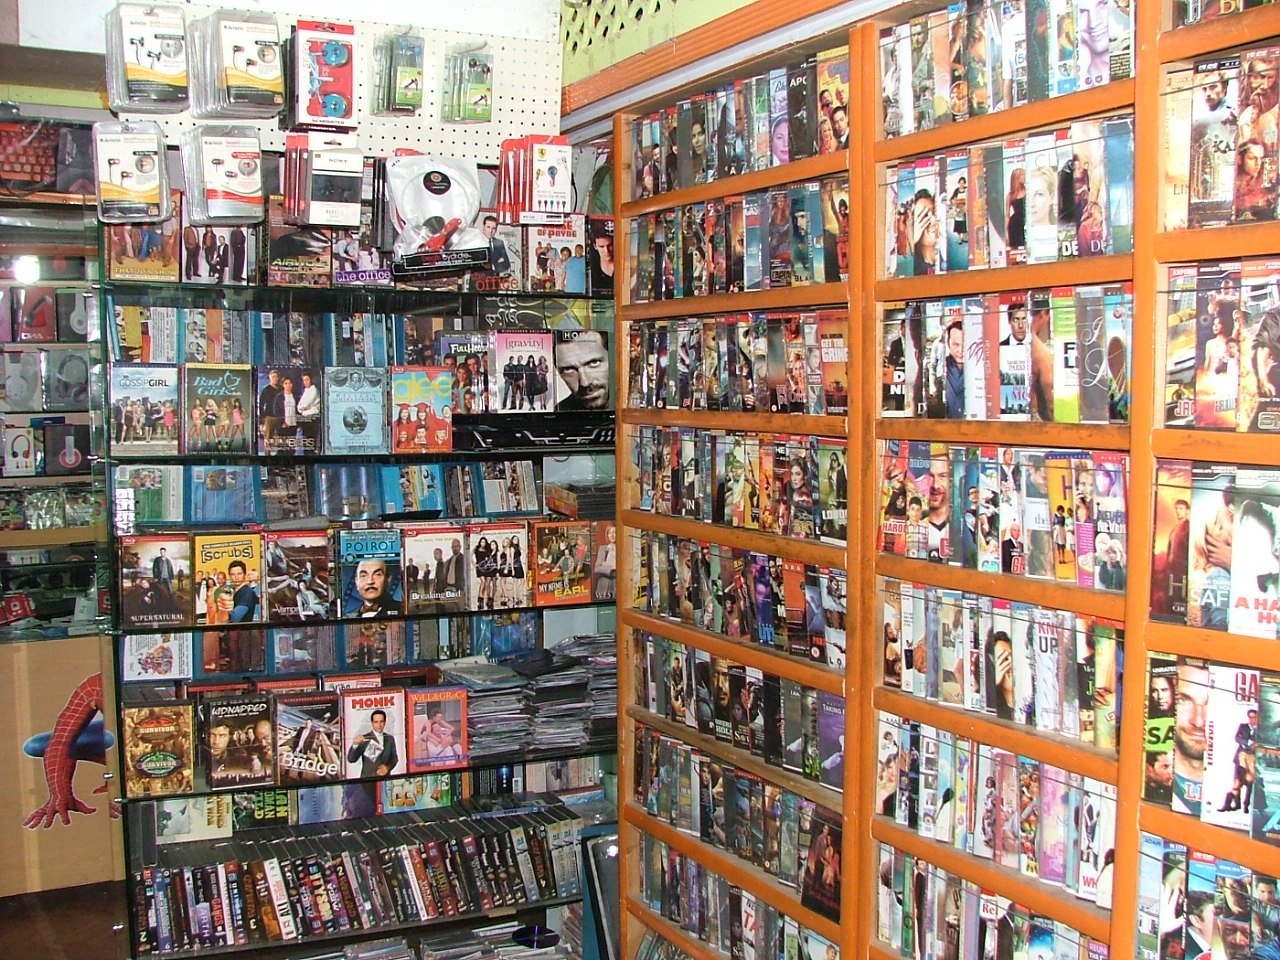 Delhi’s Iconic DVD Store Houses 50,000 DVDs From The 80’s